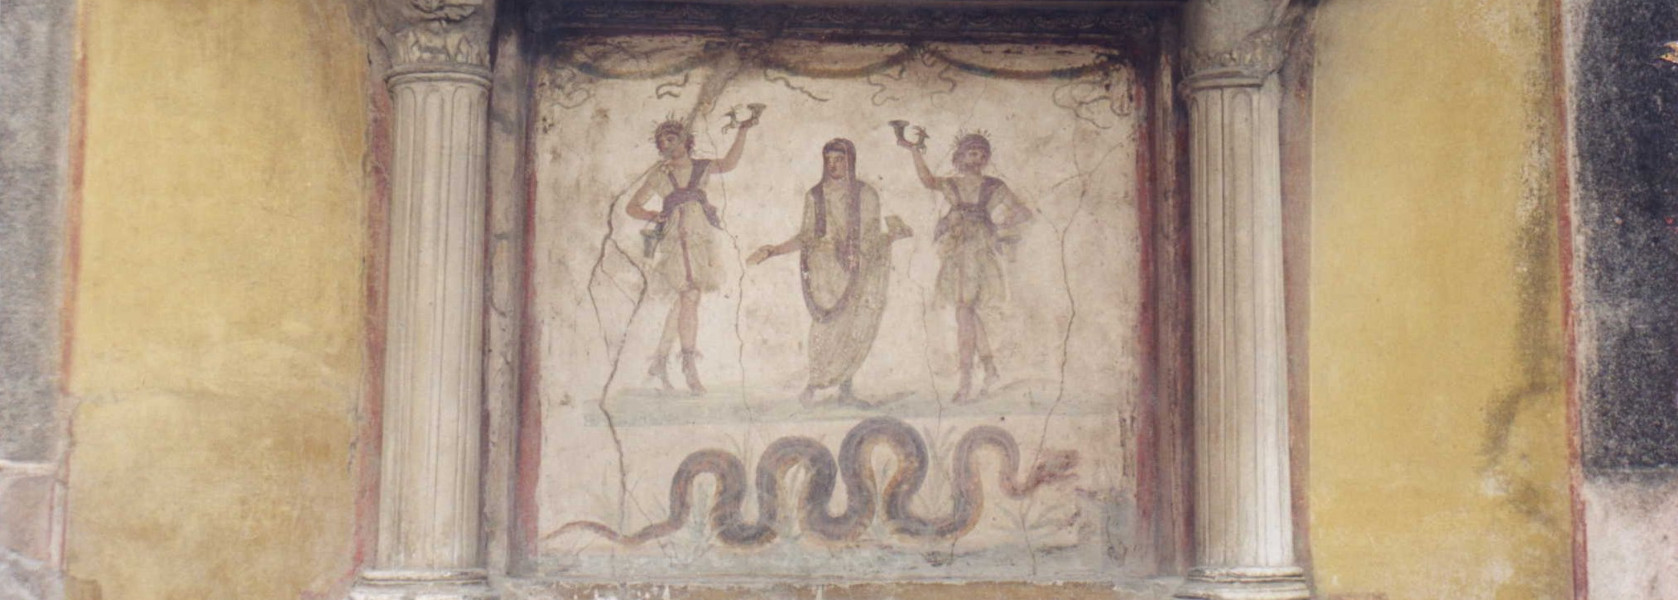 Photograph of a first-century Roman Lararium from the House of the Vettii in Pompeii. Photo is an altered version of the creative commons licensed photo found on https://commons.wikimedia.org/wiki/File:Vettii.jpg